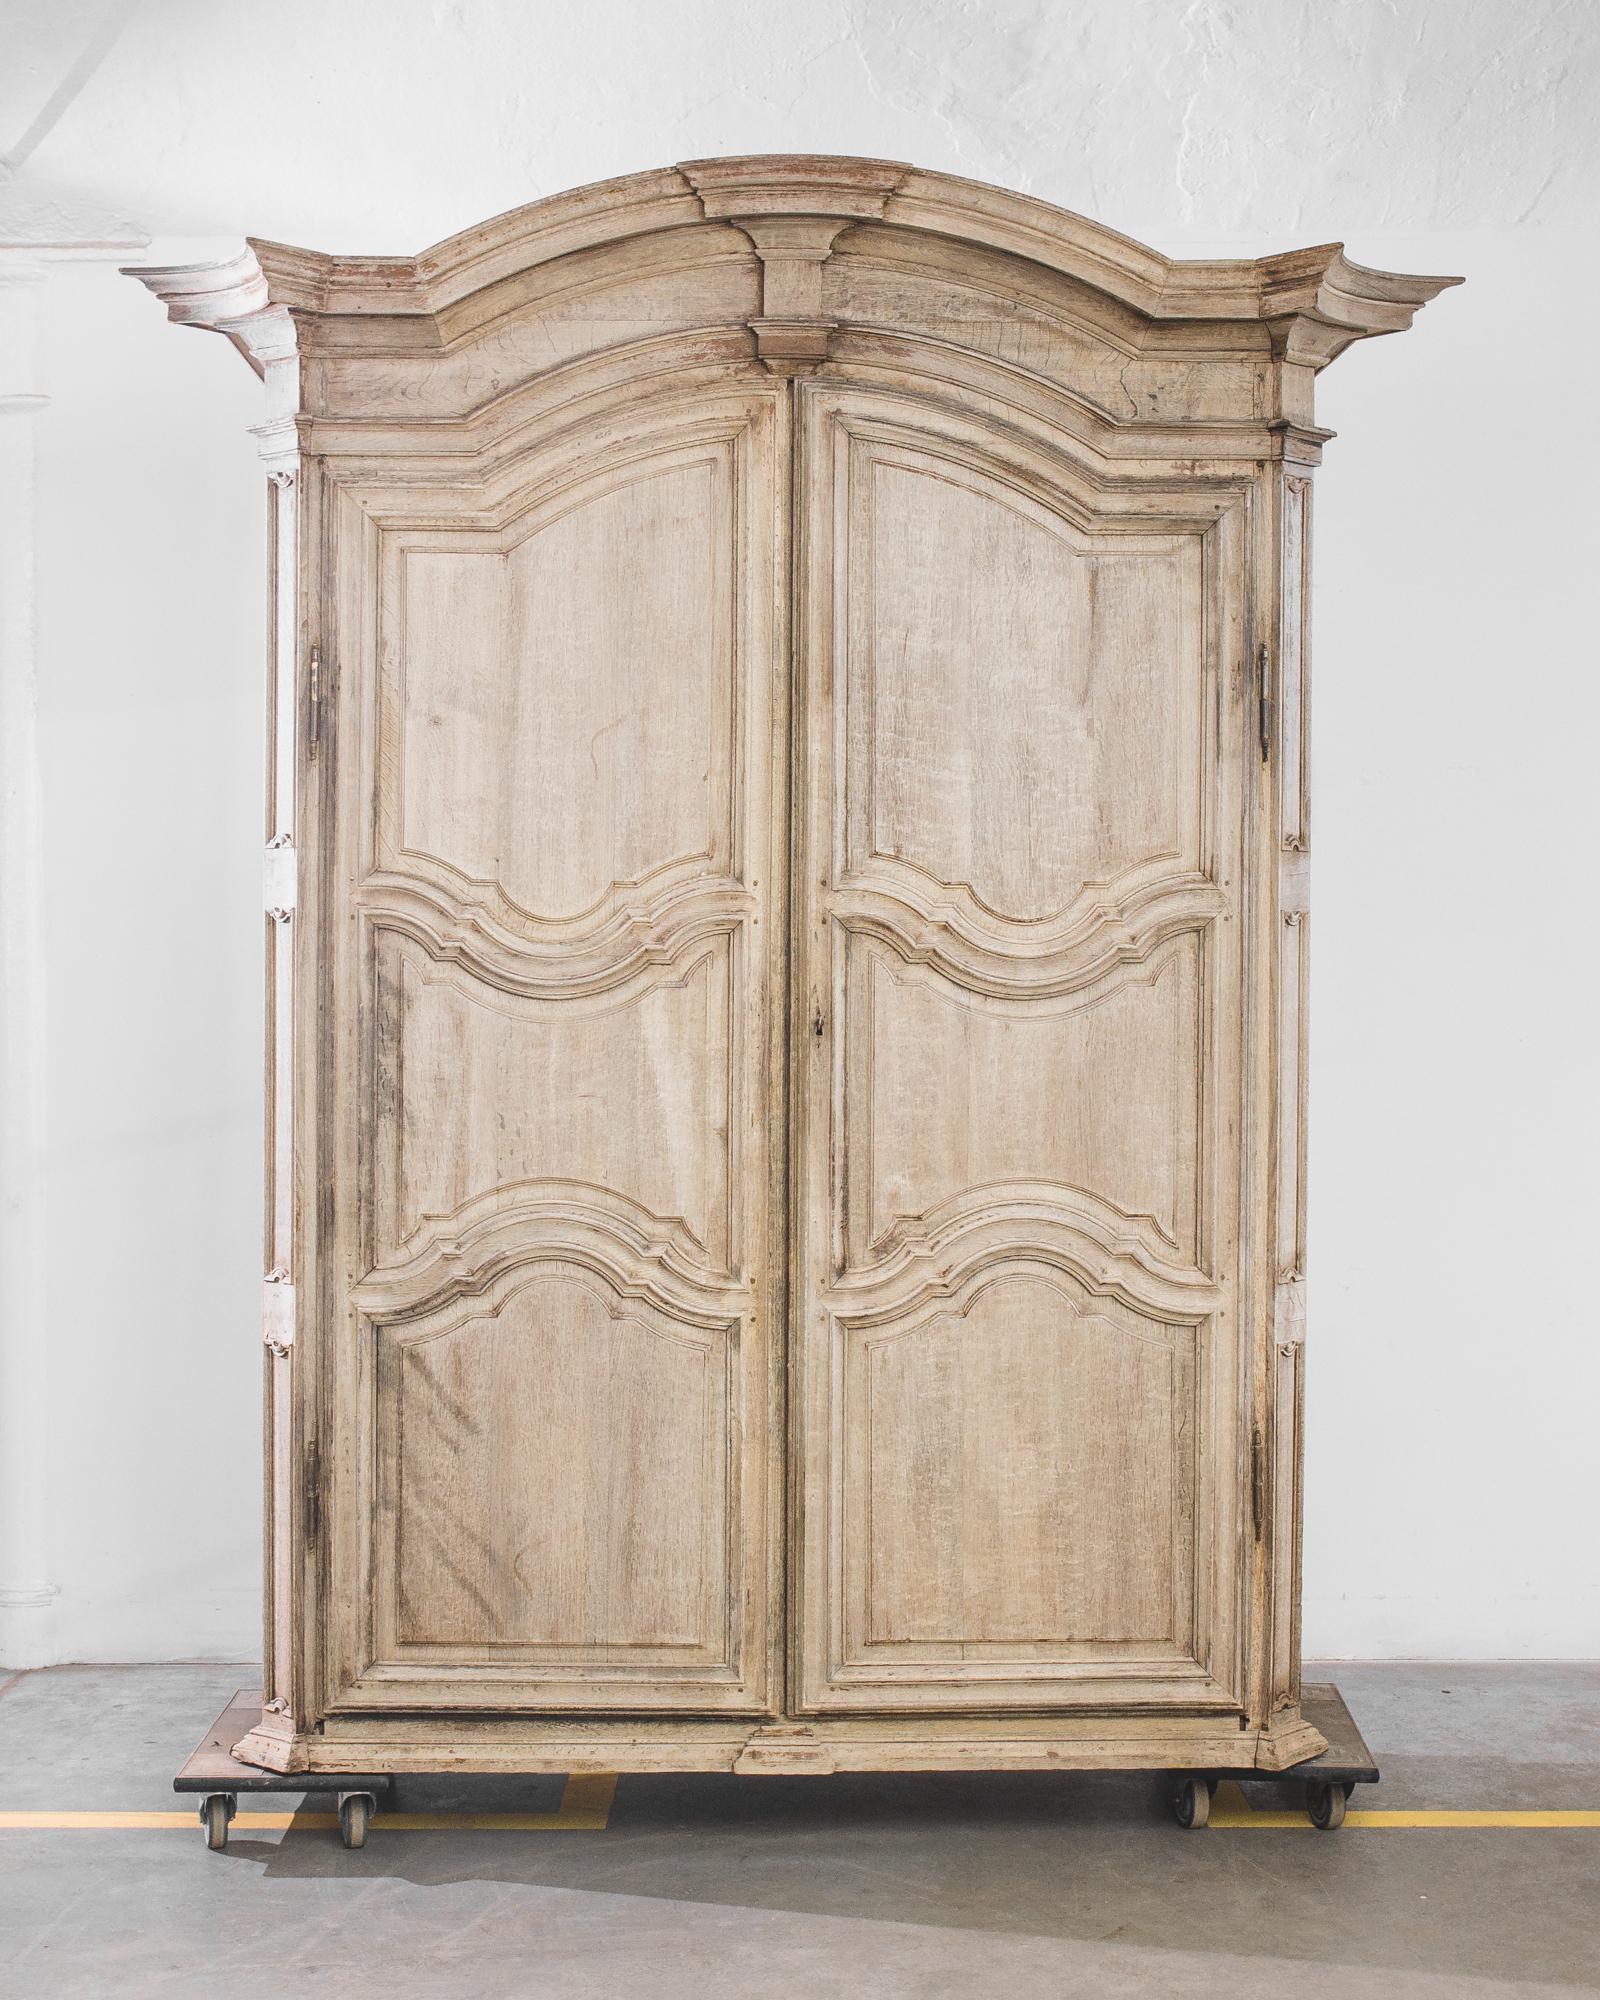 Made in a neo-classicist epoch, this 19th century Belgian armoire mesmerizes with the perfection of its contours. The angular crown boasts an impressive cavetto molding, composed of multiple tiers of mitered corners. Following the solemn outlines of